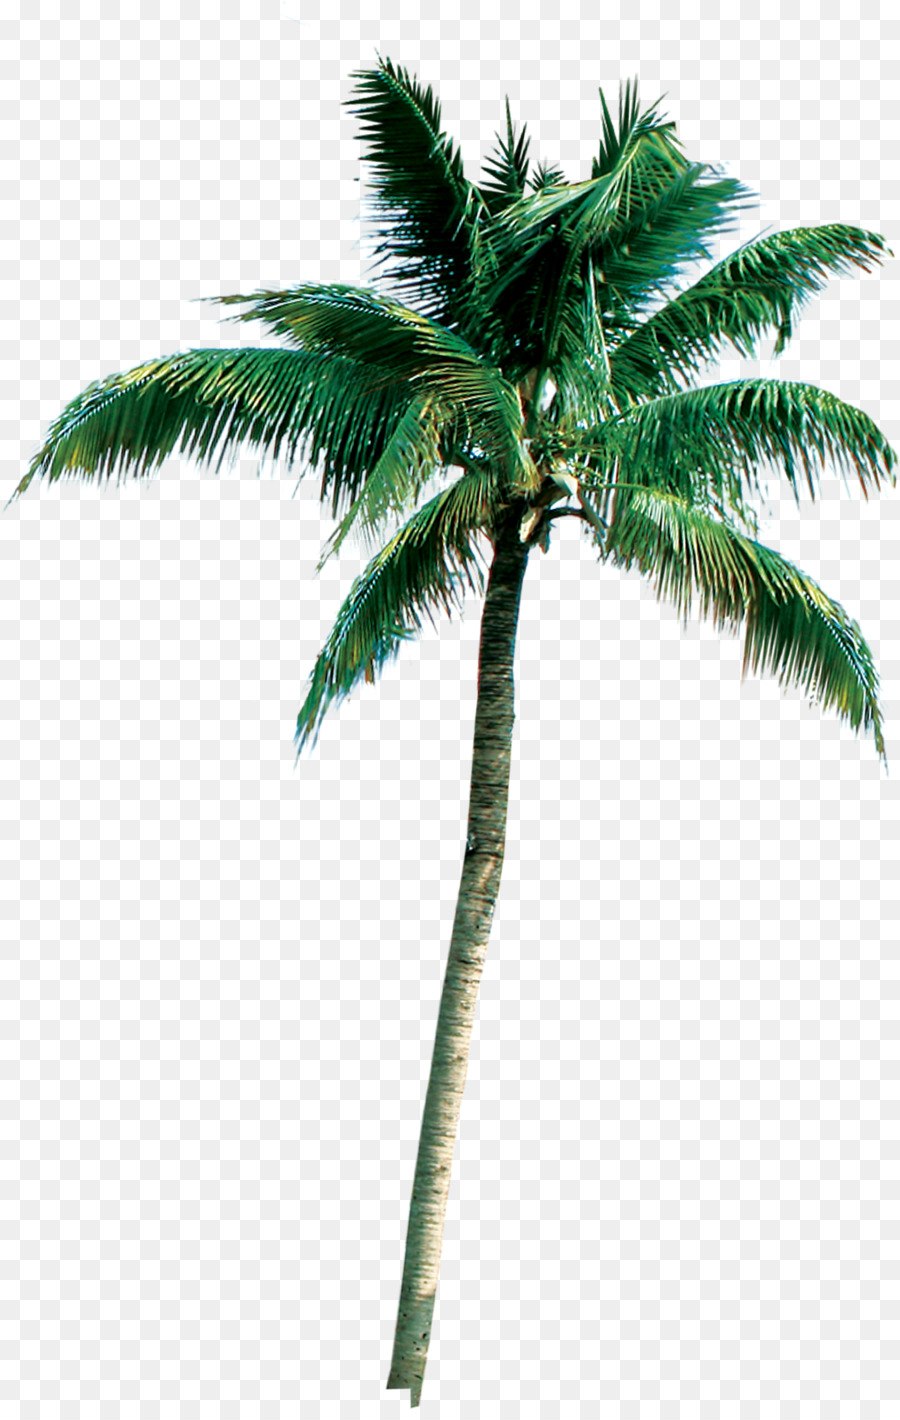 Palm trees Portable Network Graphics Coconut Clip art Roystonea regia - manzanita branches wholesale png download - 1022*1600 - Free Transparent Palm Trees png Download.